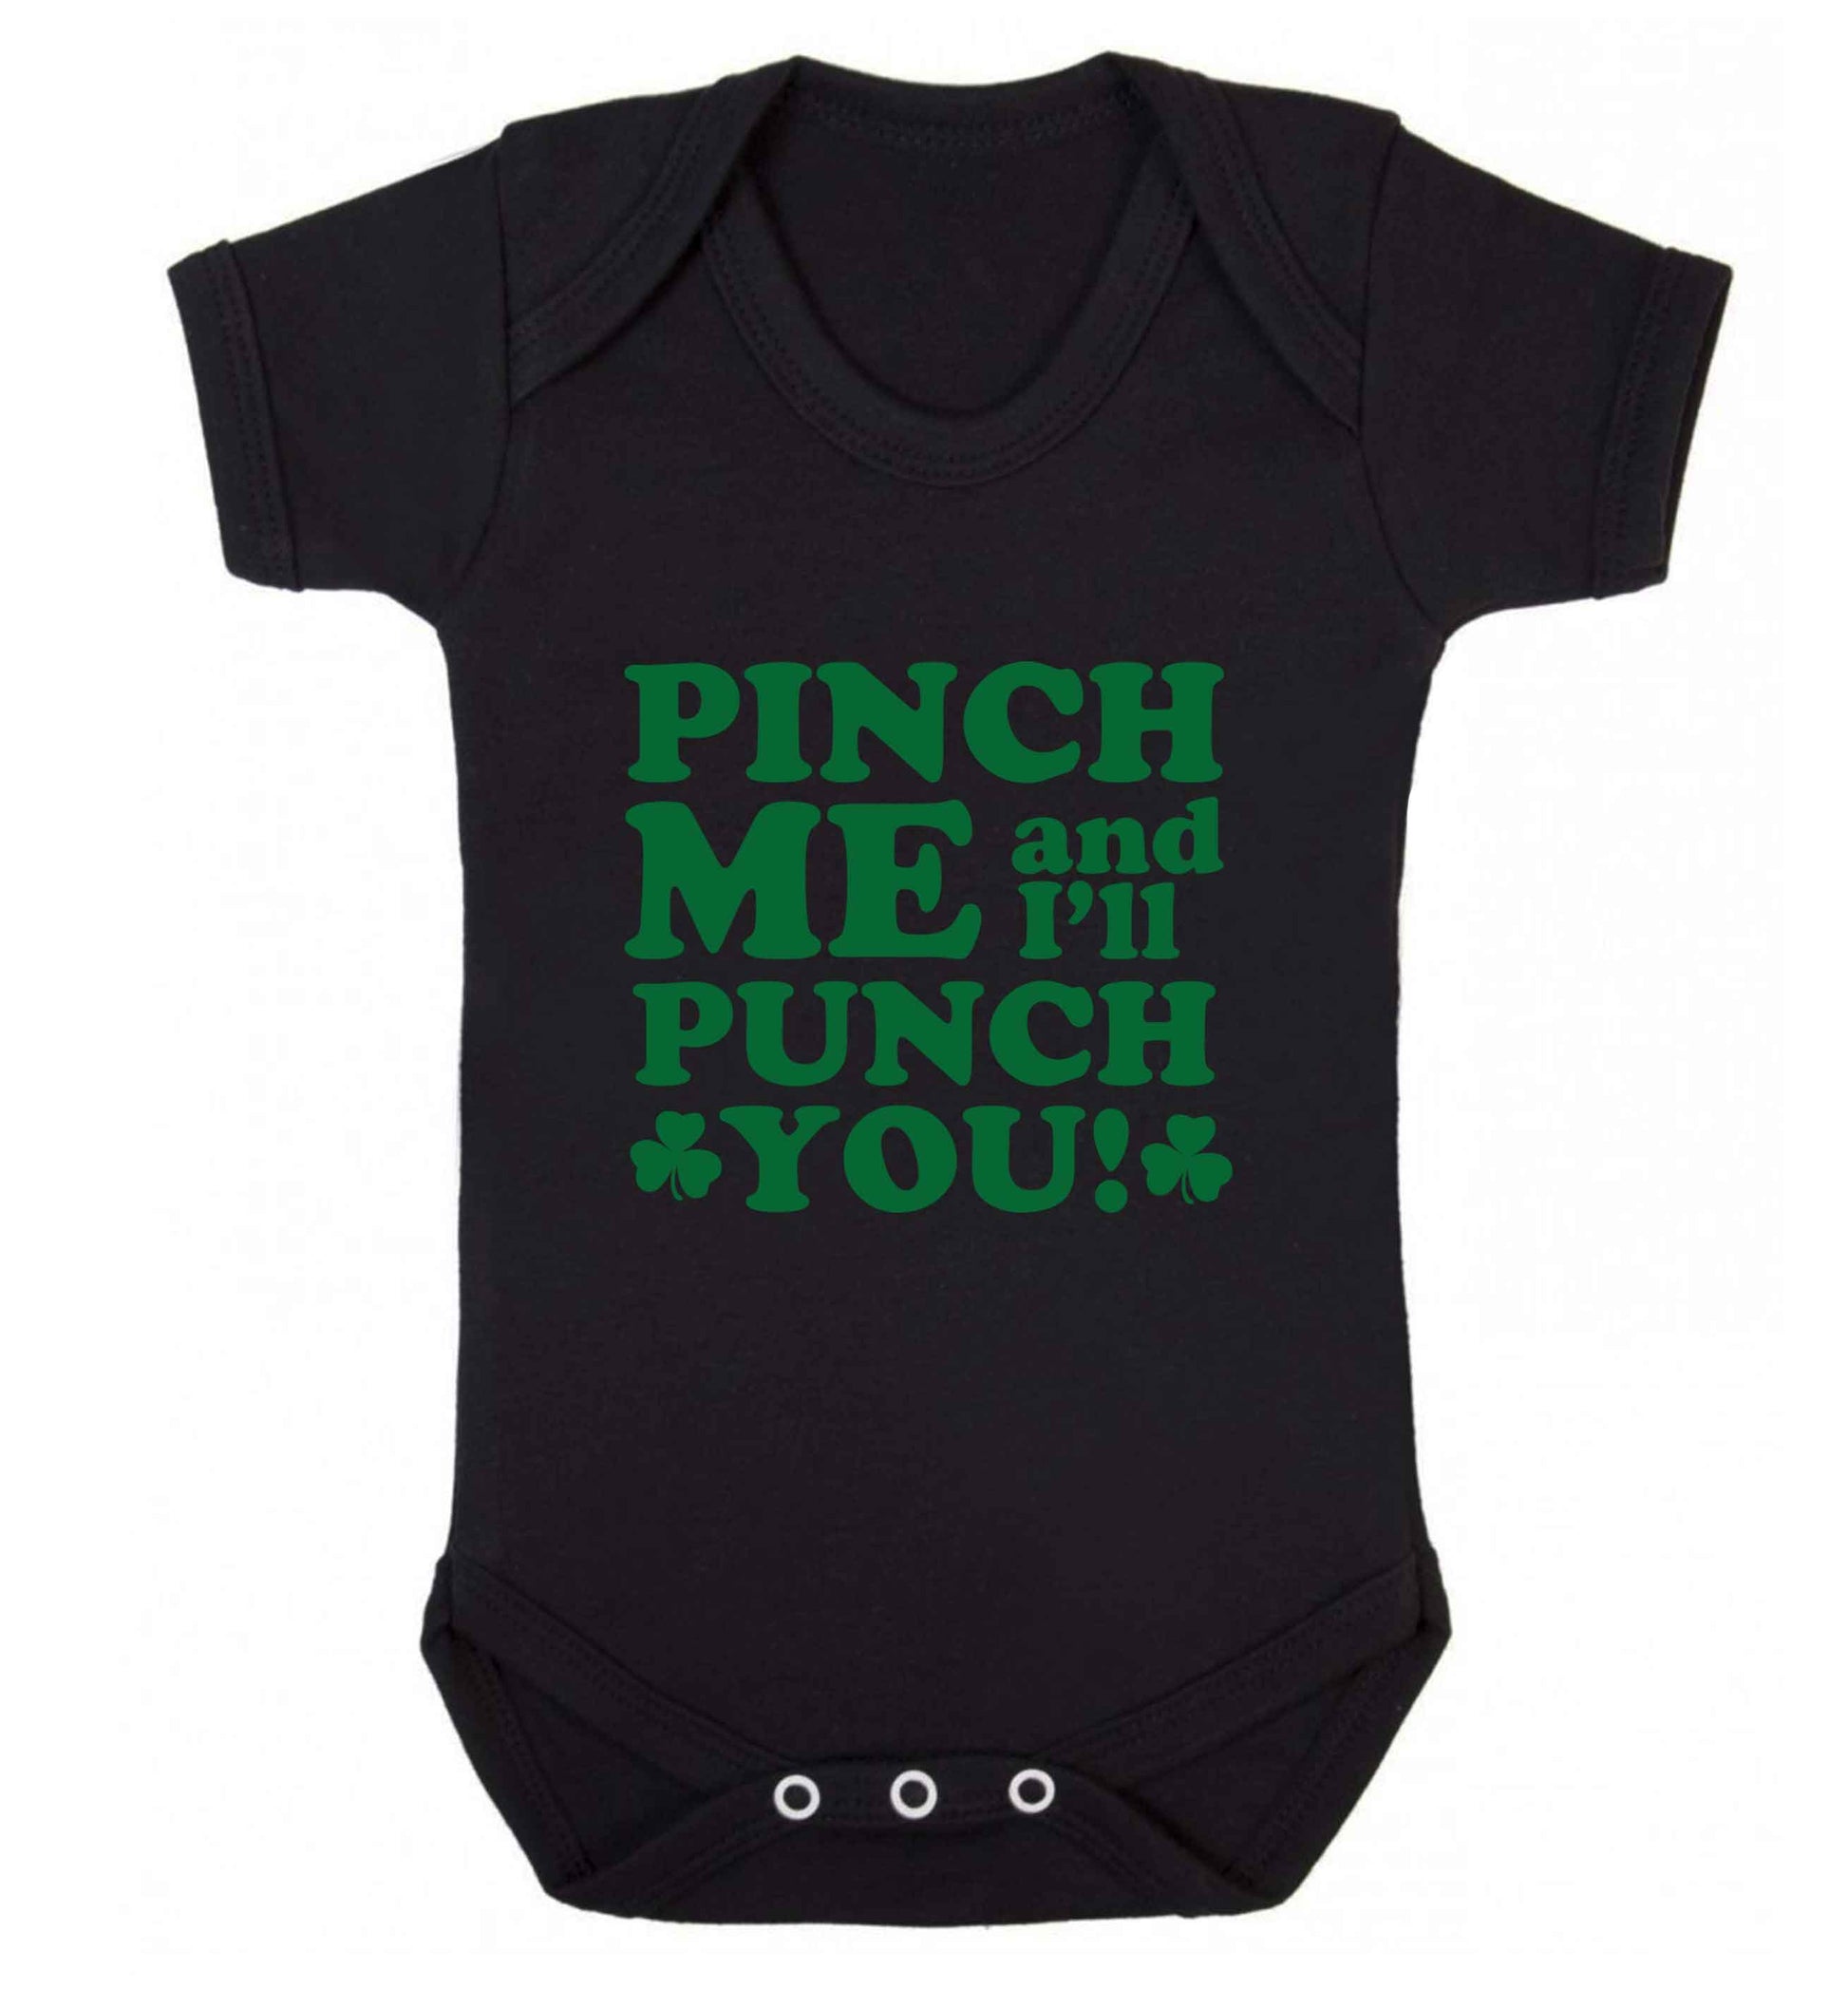 Pinch me and I'll punch you baby vest black 18-24 months